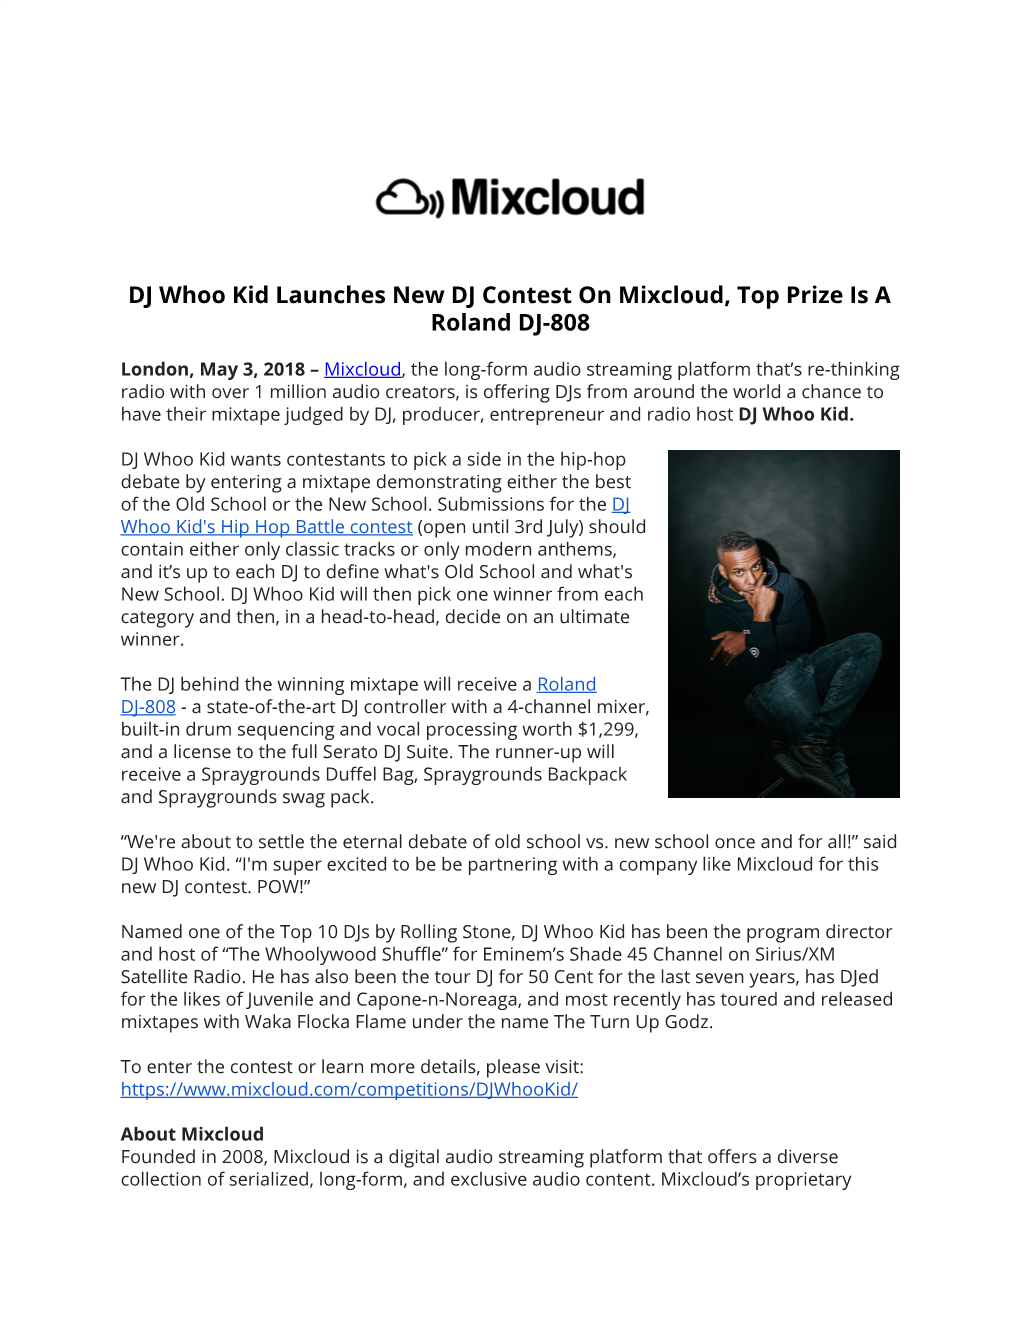 DJ Whoo Kid Launches New DJ Contest on Mixcloud, Top Prize Is a Roland DJ-808